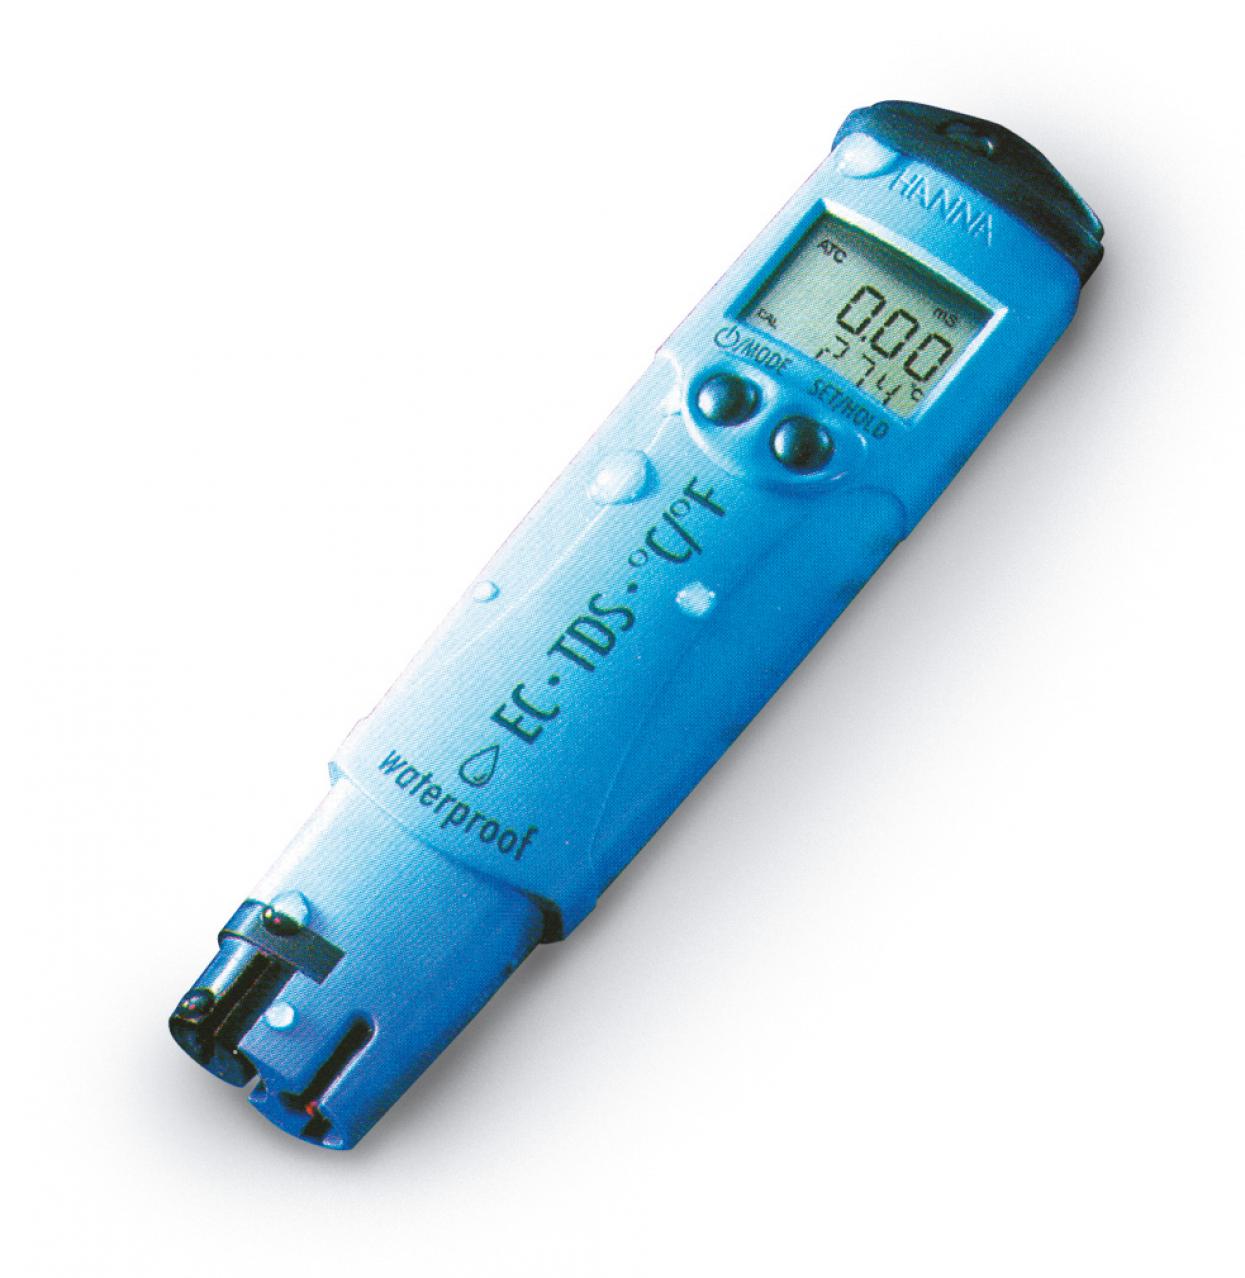 Conductivity meter - Thermometer